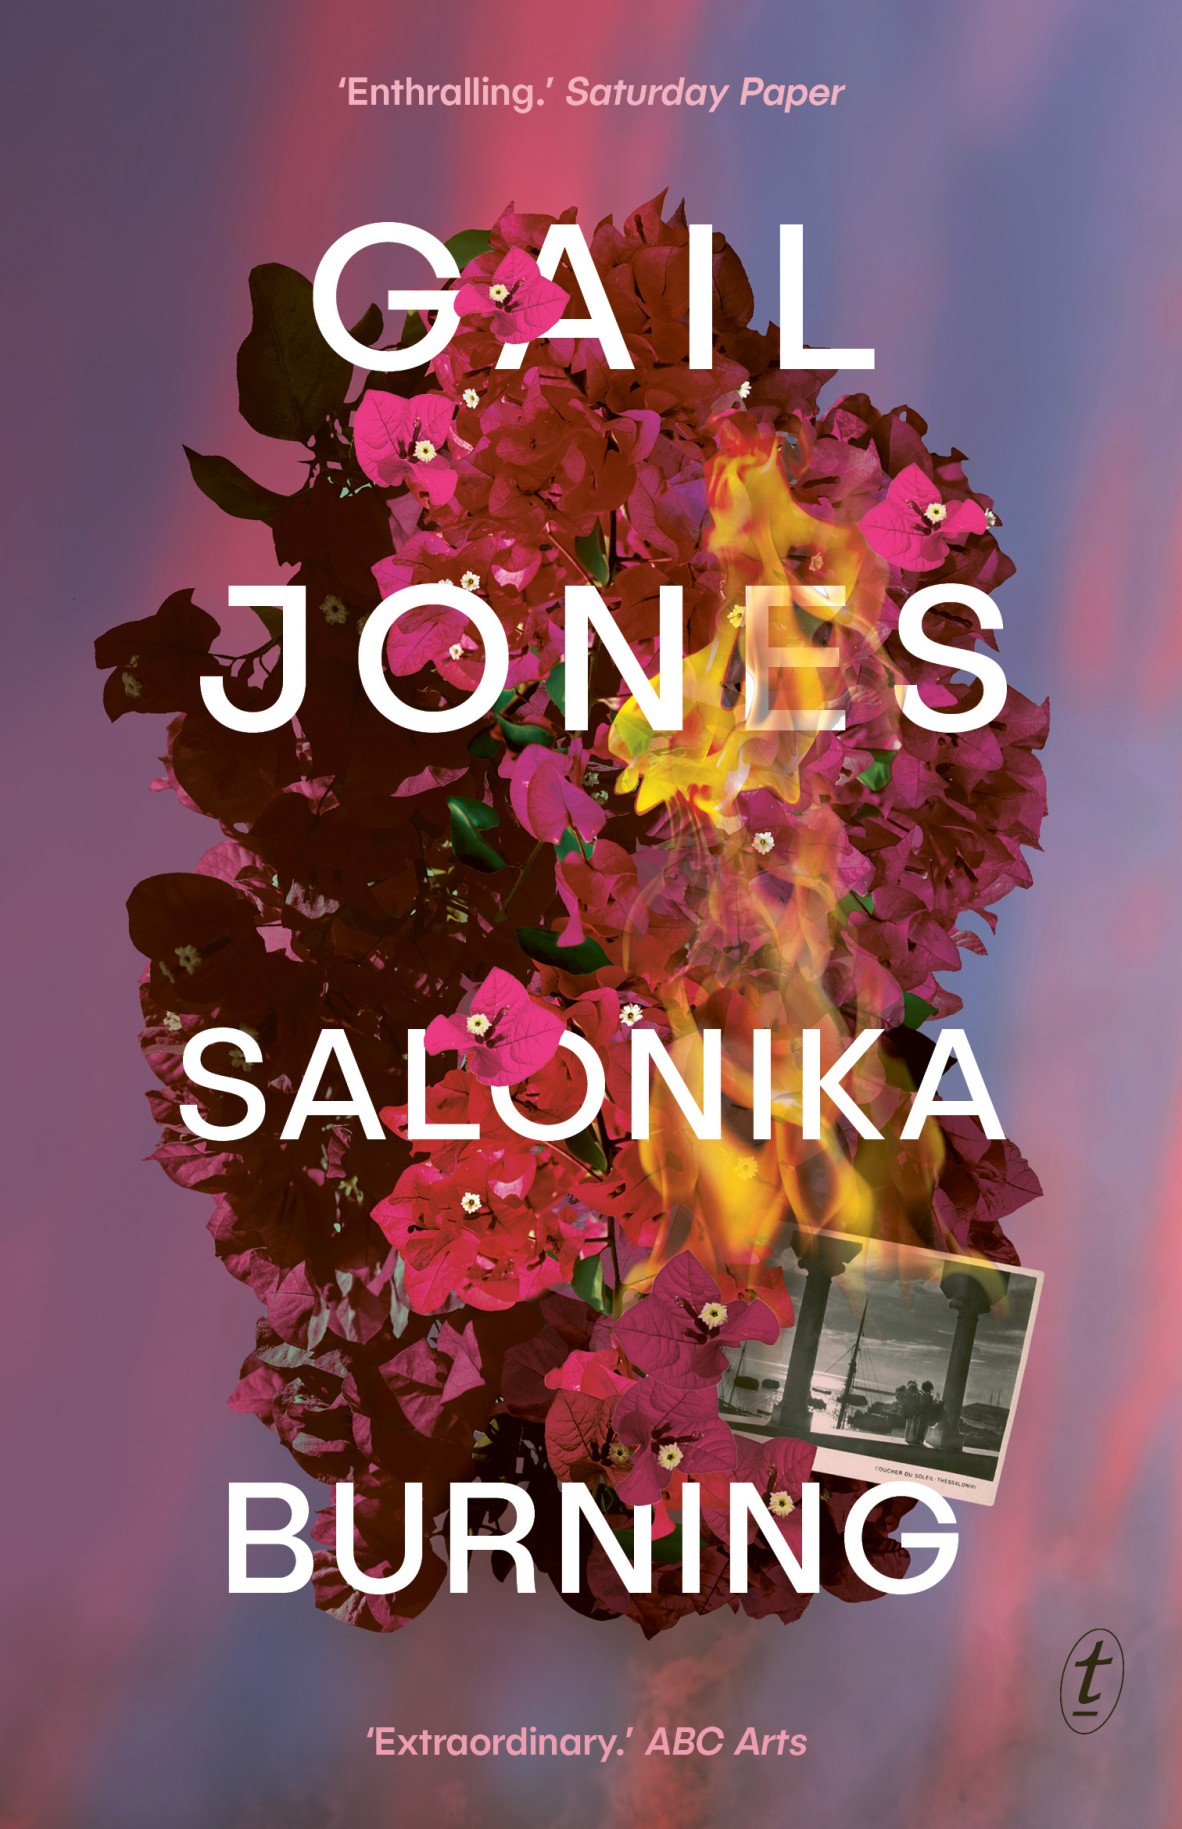 Salonika Burning by Gail Jones. The cover is purple and shows pink and red flowers and a black & white photo burning.